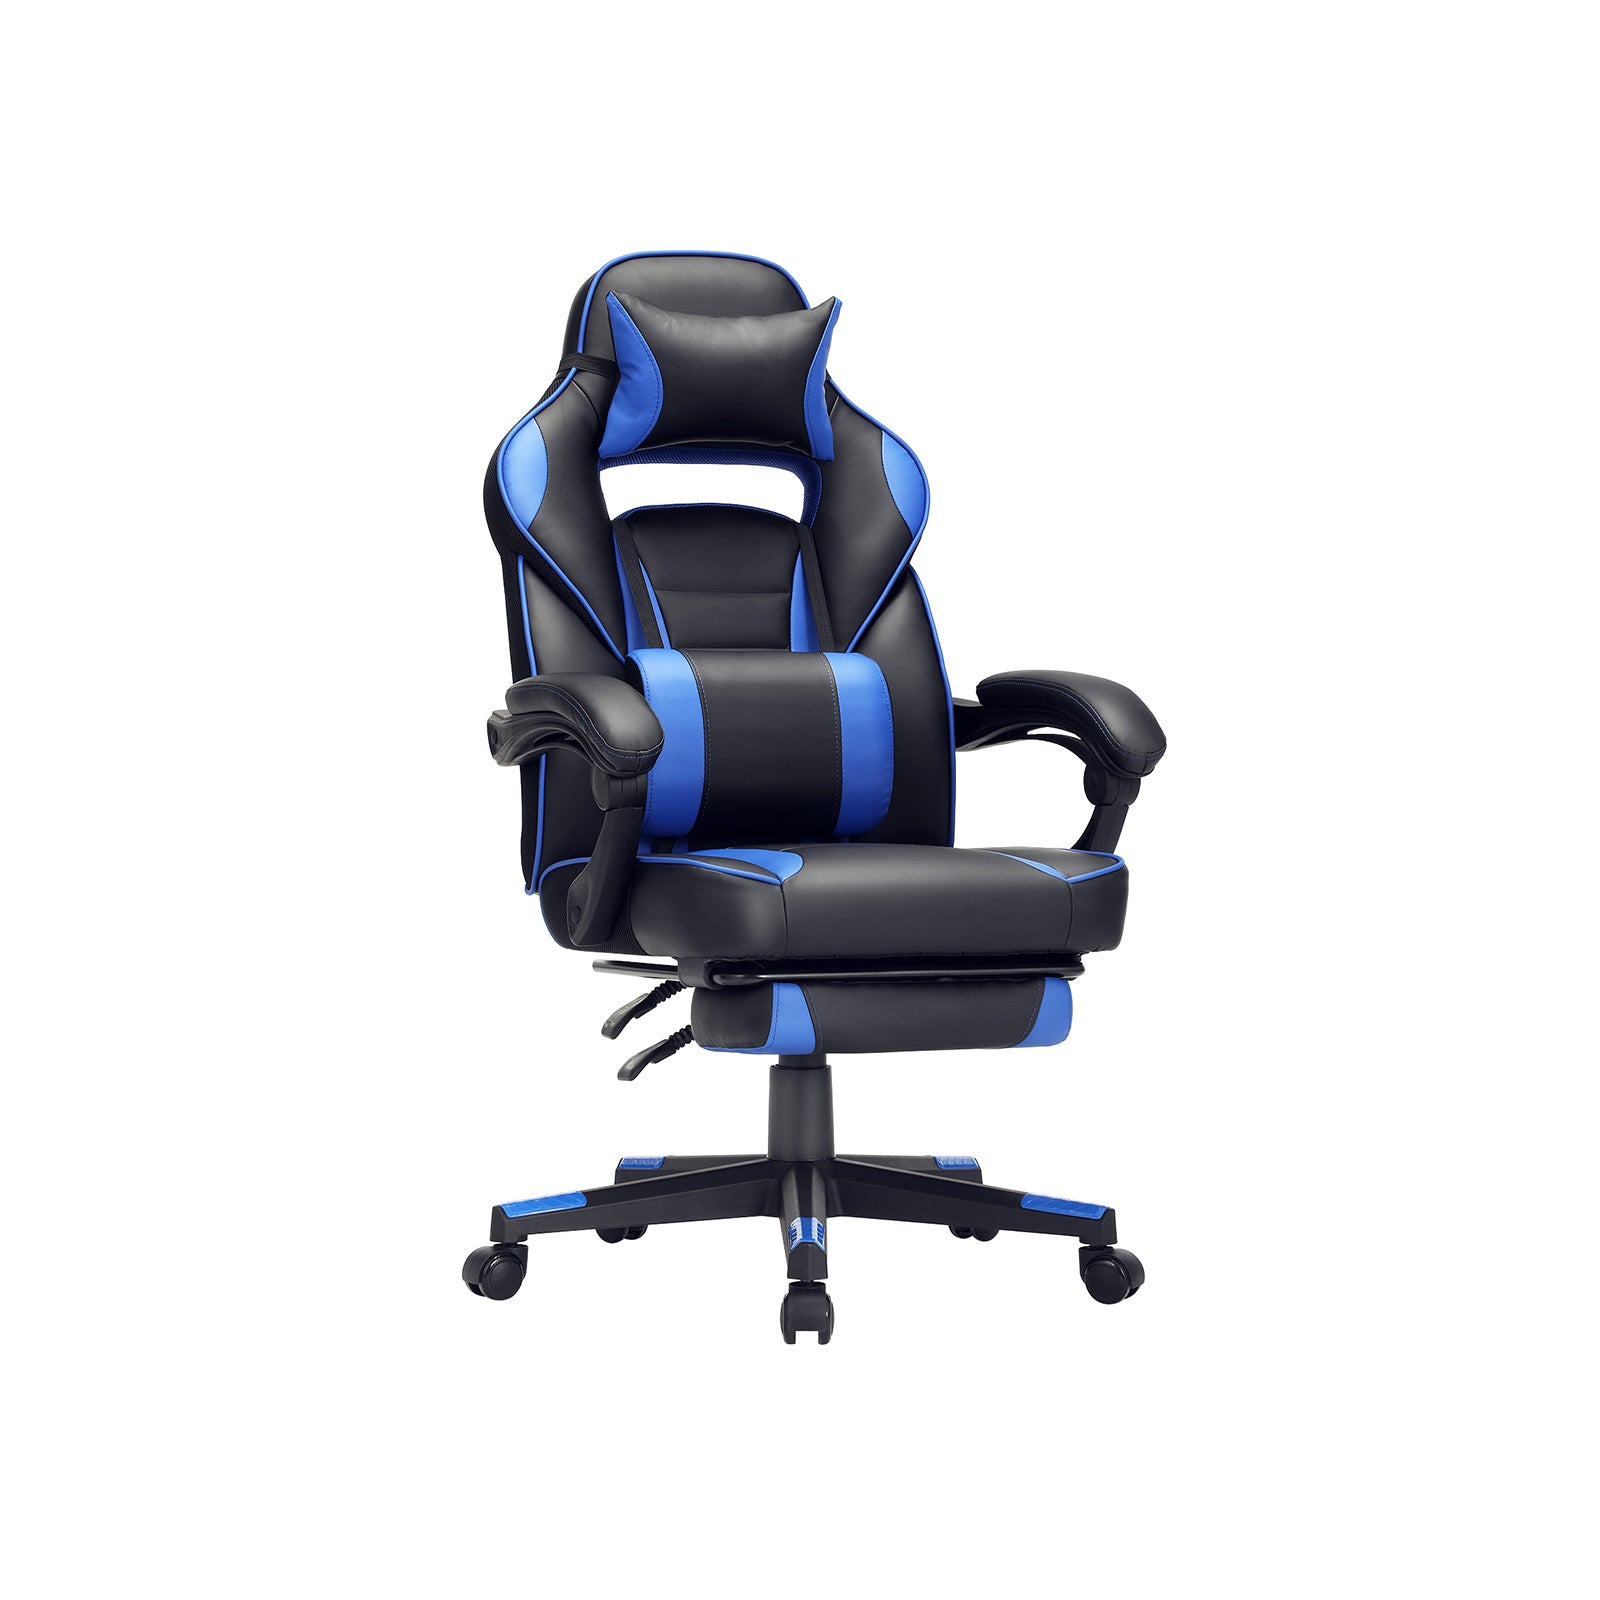 SONGMICS Racing Gaming Chair with Footrest